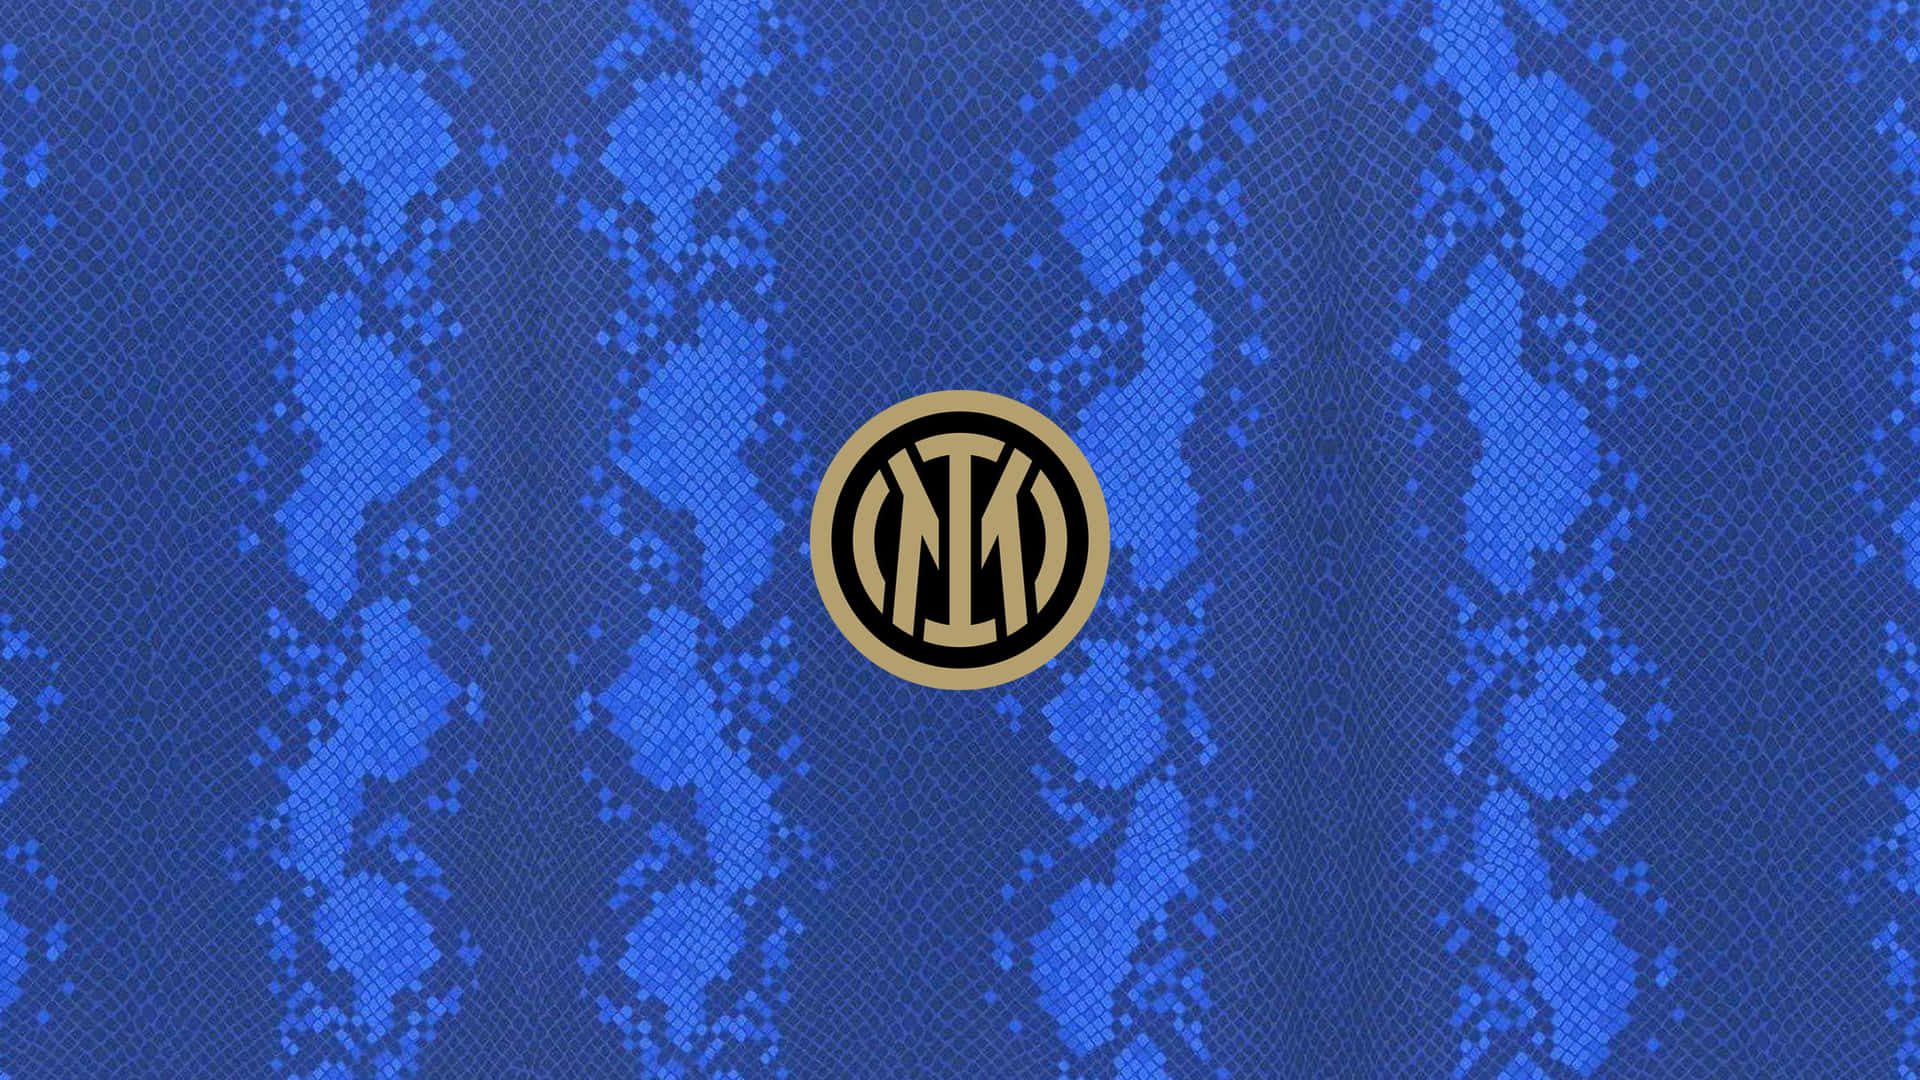 I'msorry, But Could You Please Provide More Context Or Specify What You Would Like Me To Translate With Regards To Inter Milan? Thank You. Fondo de pantalla